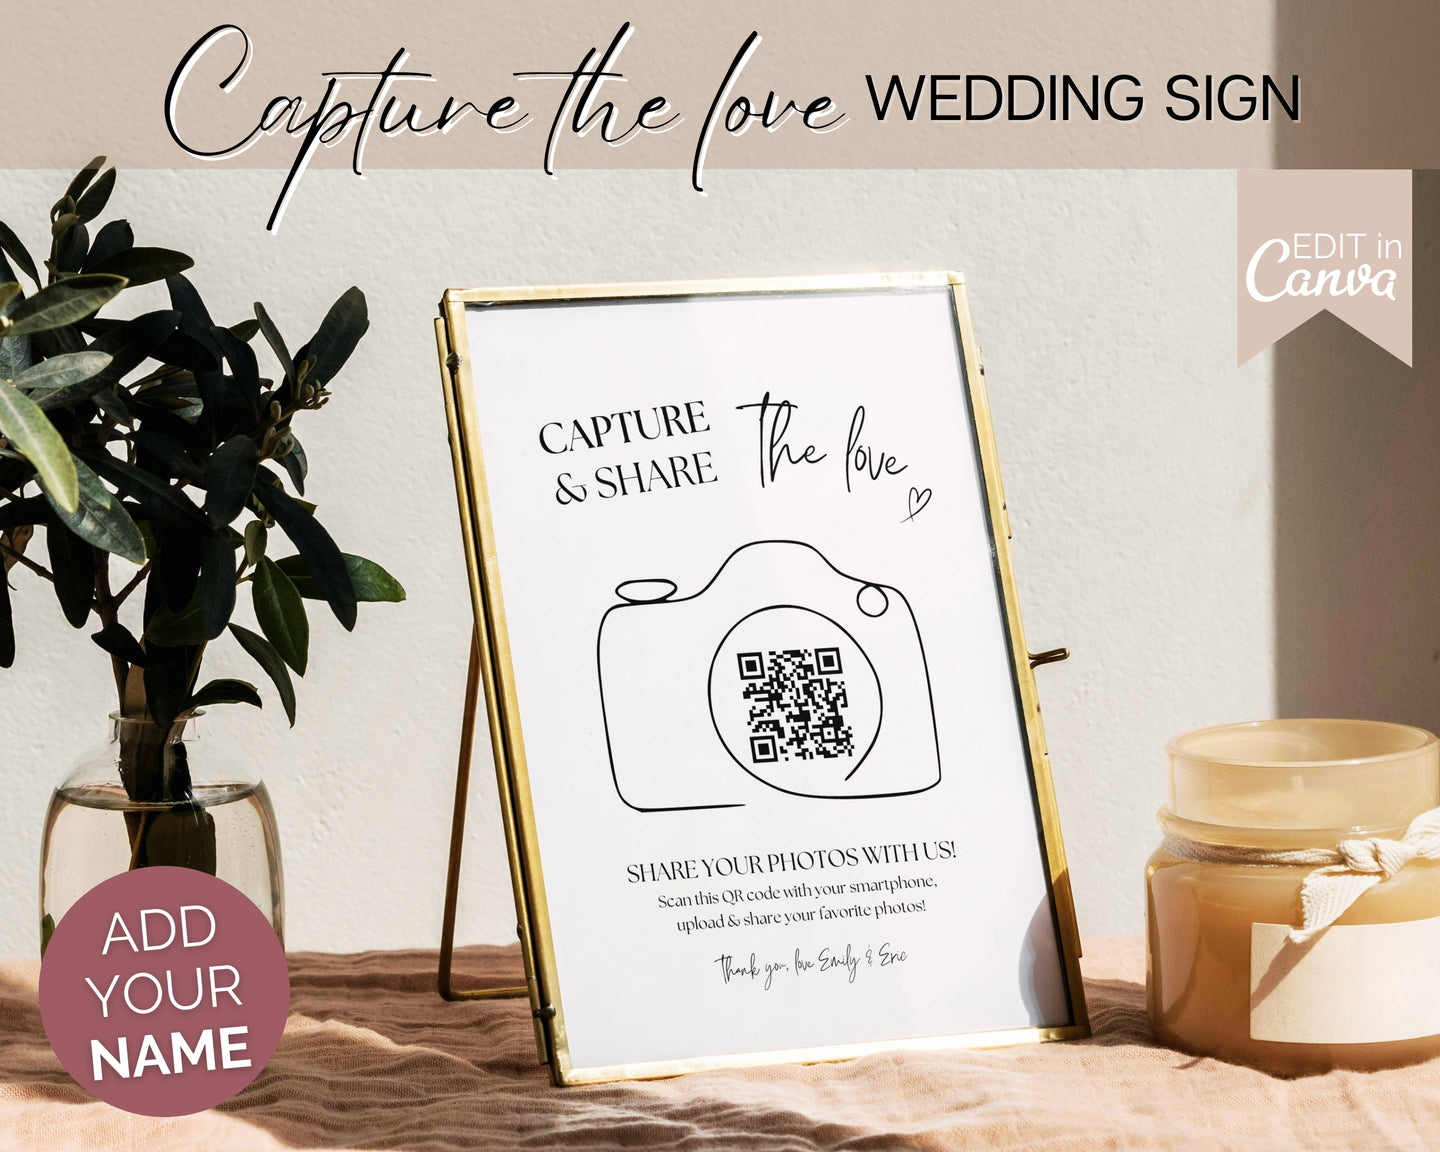 Editable Capture the Love QR Code Sign | EDITABLE Wedding Reception Signage for Camera, Wedding Table games, QR Code Canva Template & Modern Photo Sign